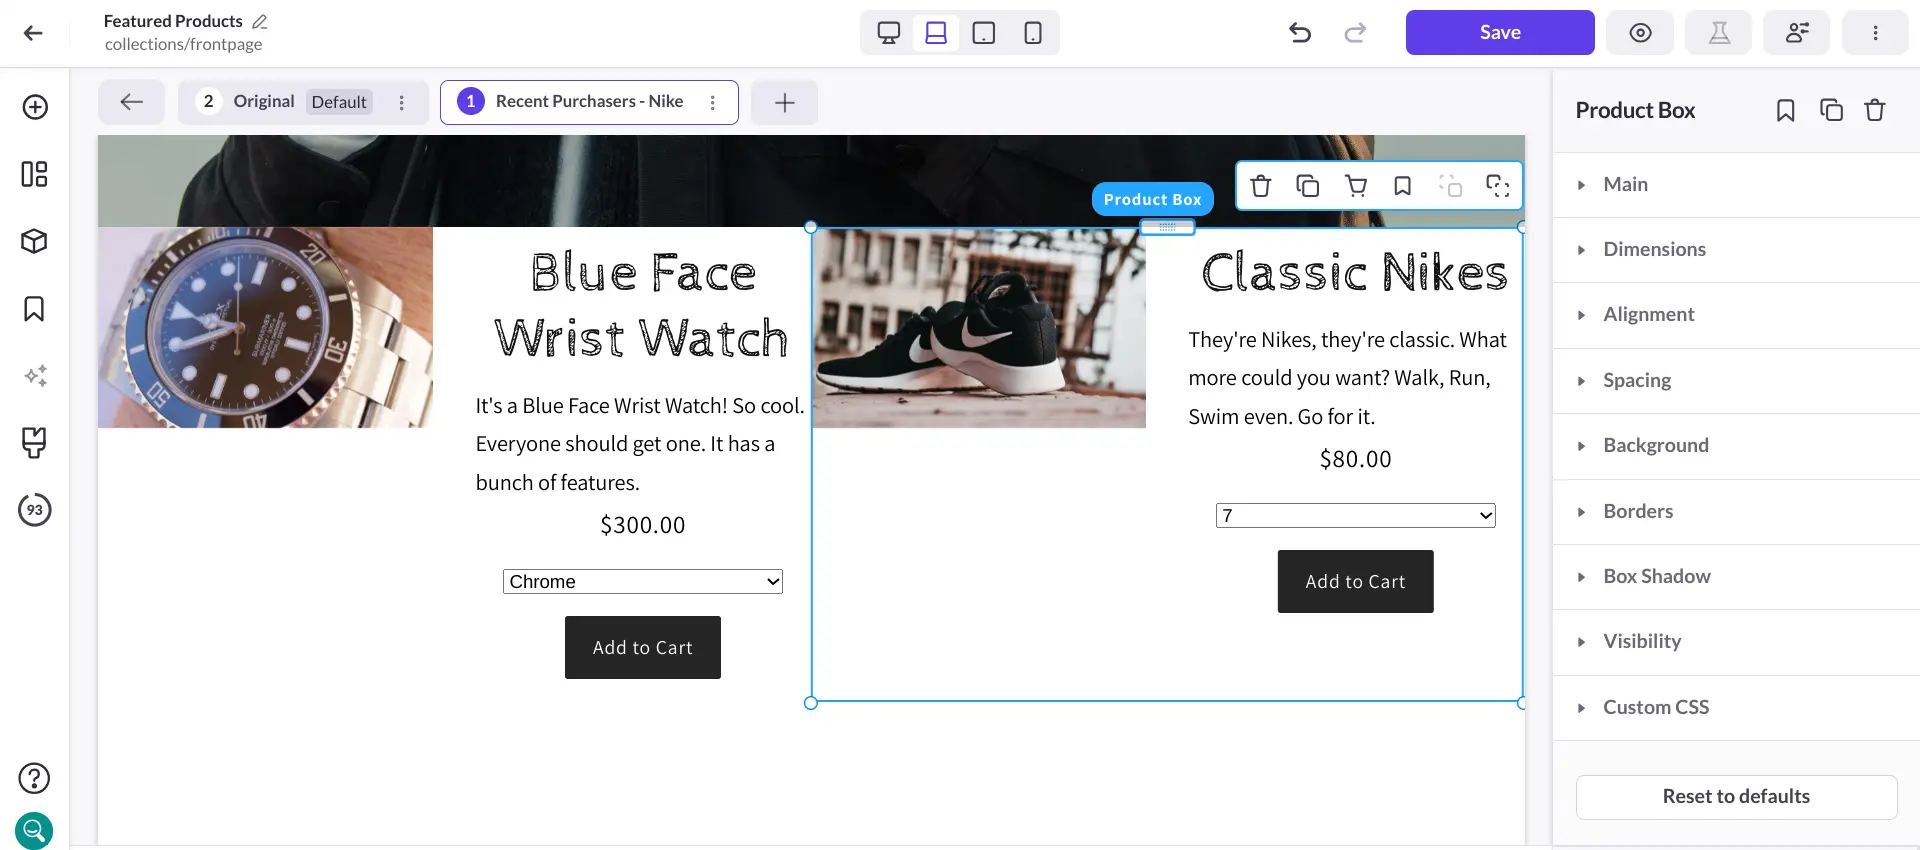 You can use Personalization to show visitors different versions of the same collections page.